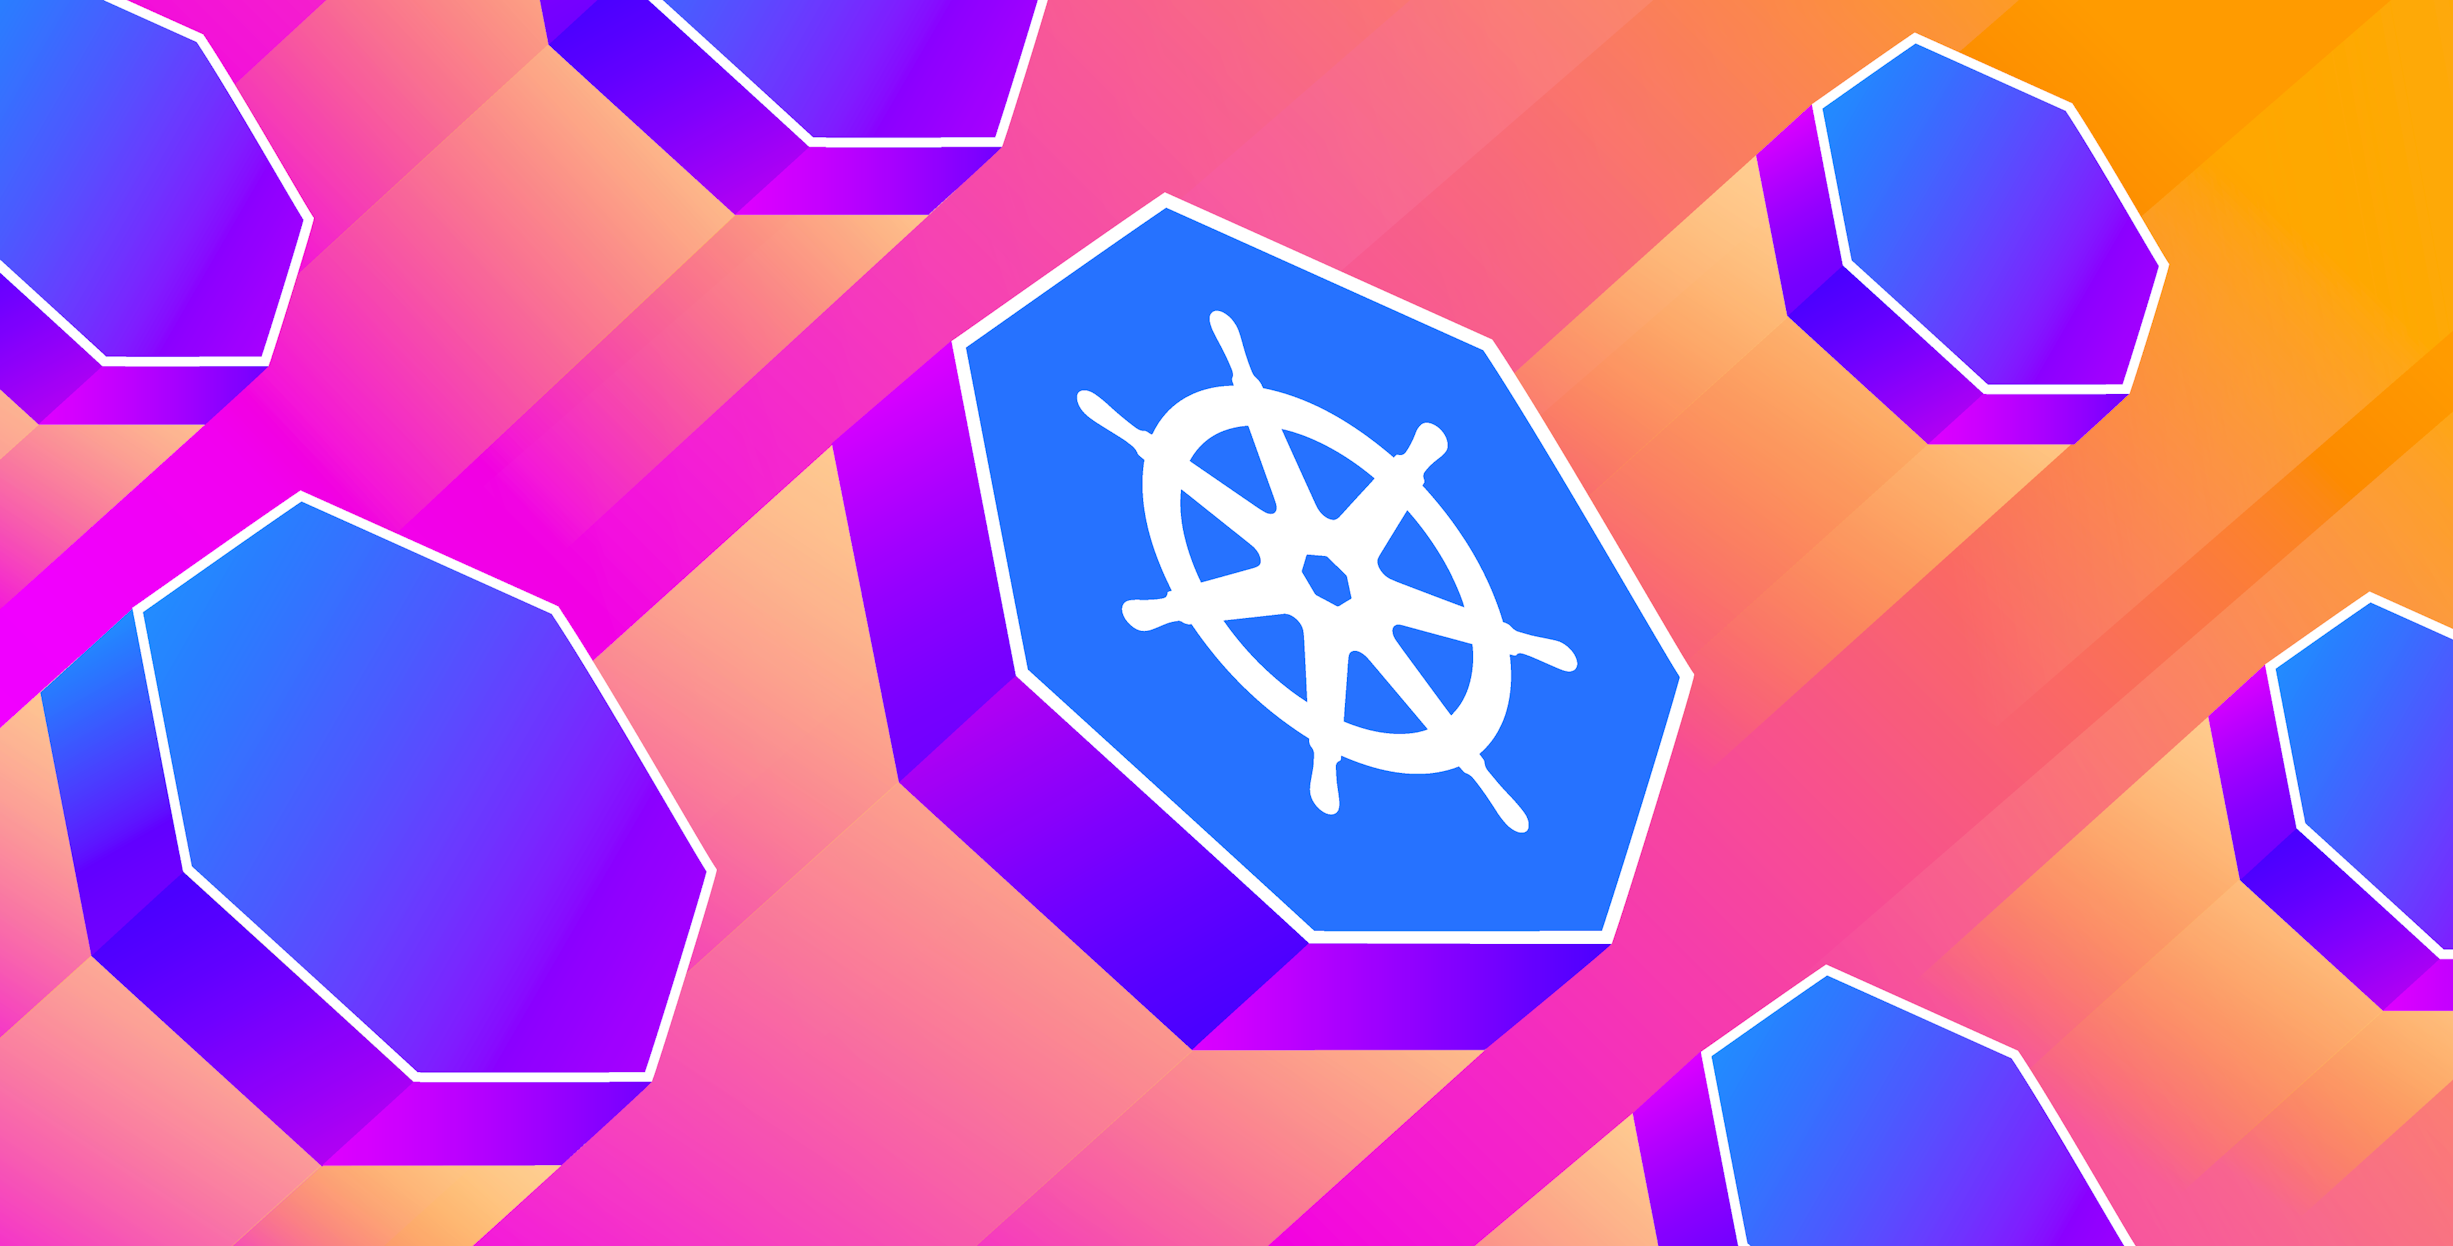 What's New For Security In Kubernetes 1.26